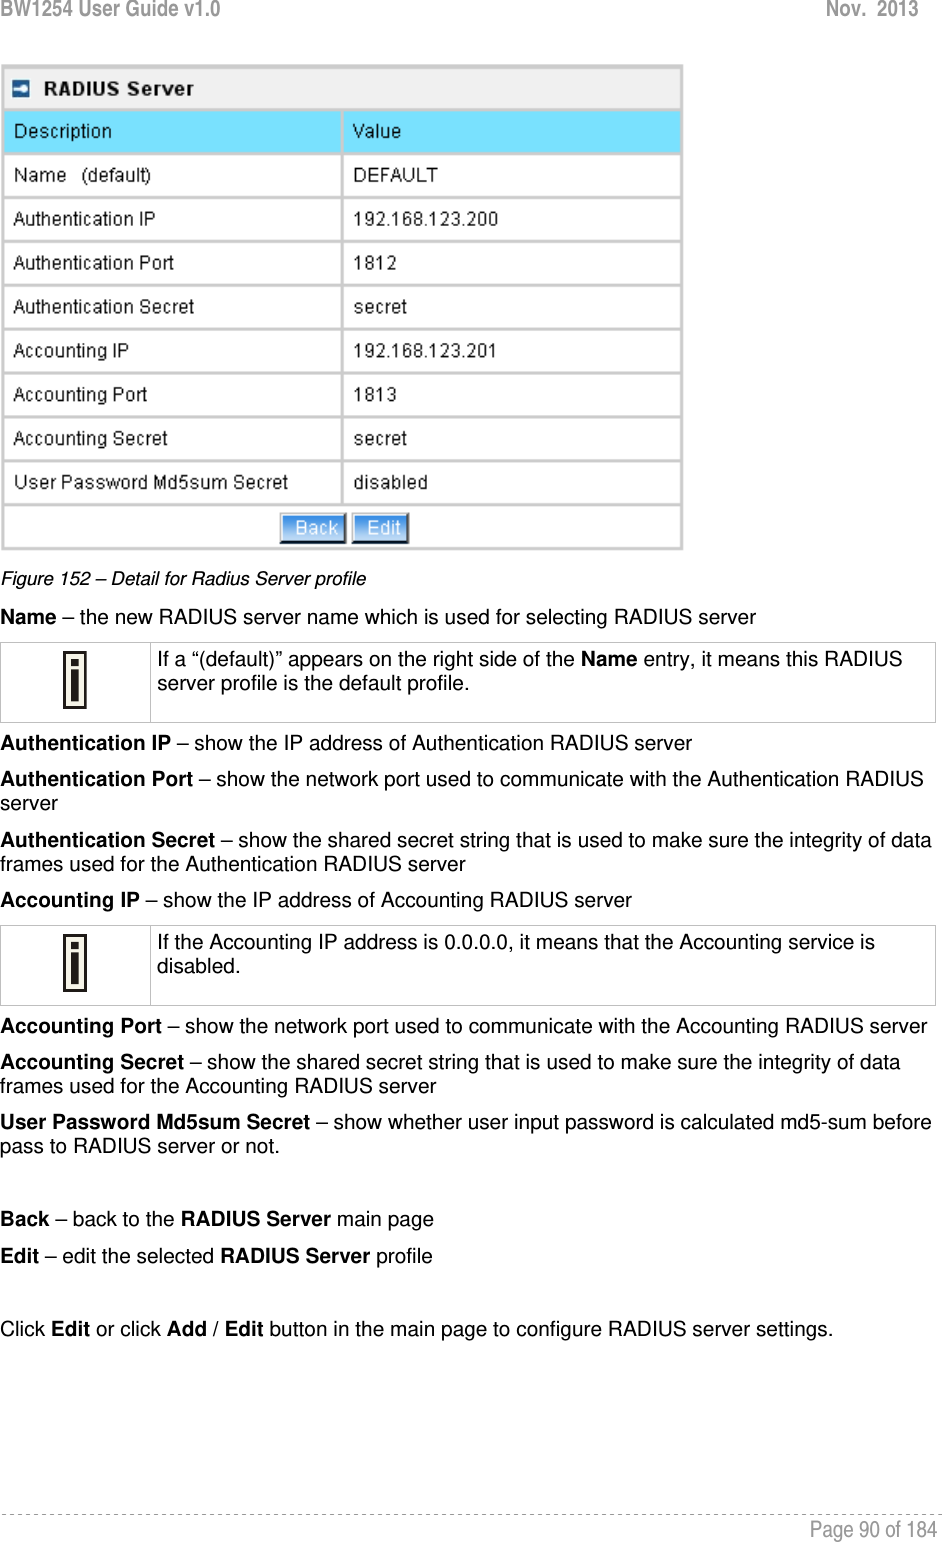 BW1254 User Guide v1.0  Nov.  2013     Page 90 of 184    Figure 152 – Detail for Radius Server profile Name – the new RADIUS server name which is used for selecting RADIUS server  If a “(default)” appears on the right side of the Name entry, it means this RADIUS server profile is the default profile. Authentication IP – show the IP address of Authentication RADIUS server Authentication Port – show the network port used to communicate with the Authentication RADIUS server Authentication Secret – show the shared secret string that is used to make sure the integrity of data frames used for the Authentication RADIUS server Accounting IP – show the IP address of Accounting RADIUS server  If the Accounting IP address is 0.0.0.0, it means that the Accounting service is disabled. Accounting Port – show the network port used to communicate with the Accounting RADIUS server Accounting Secret – show the shared secret string that is used to make sure the integrity of data frames used for the Accounting RADIUS server User Password Md5sum Secret – show whether user input password is calculated md5-sum before pass to RADIUS server or not.  Back – back to the RADIUS Server main page Edit – edit the selected RADIUS Server profile  Click Edit or click Add / Edit button in the main page to configure RADIUS server settings. 